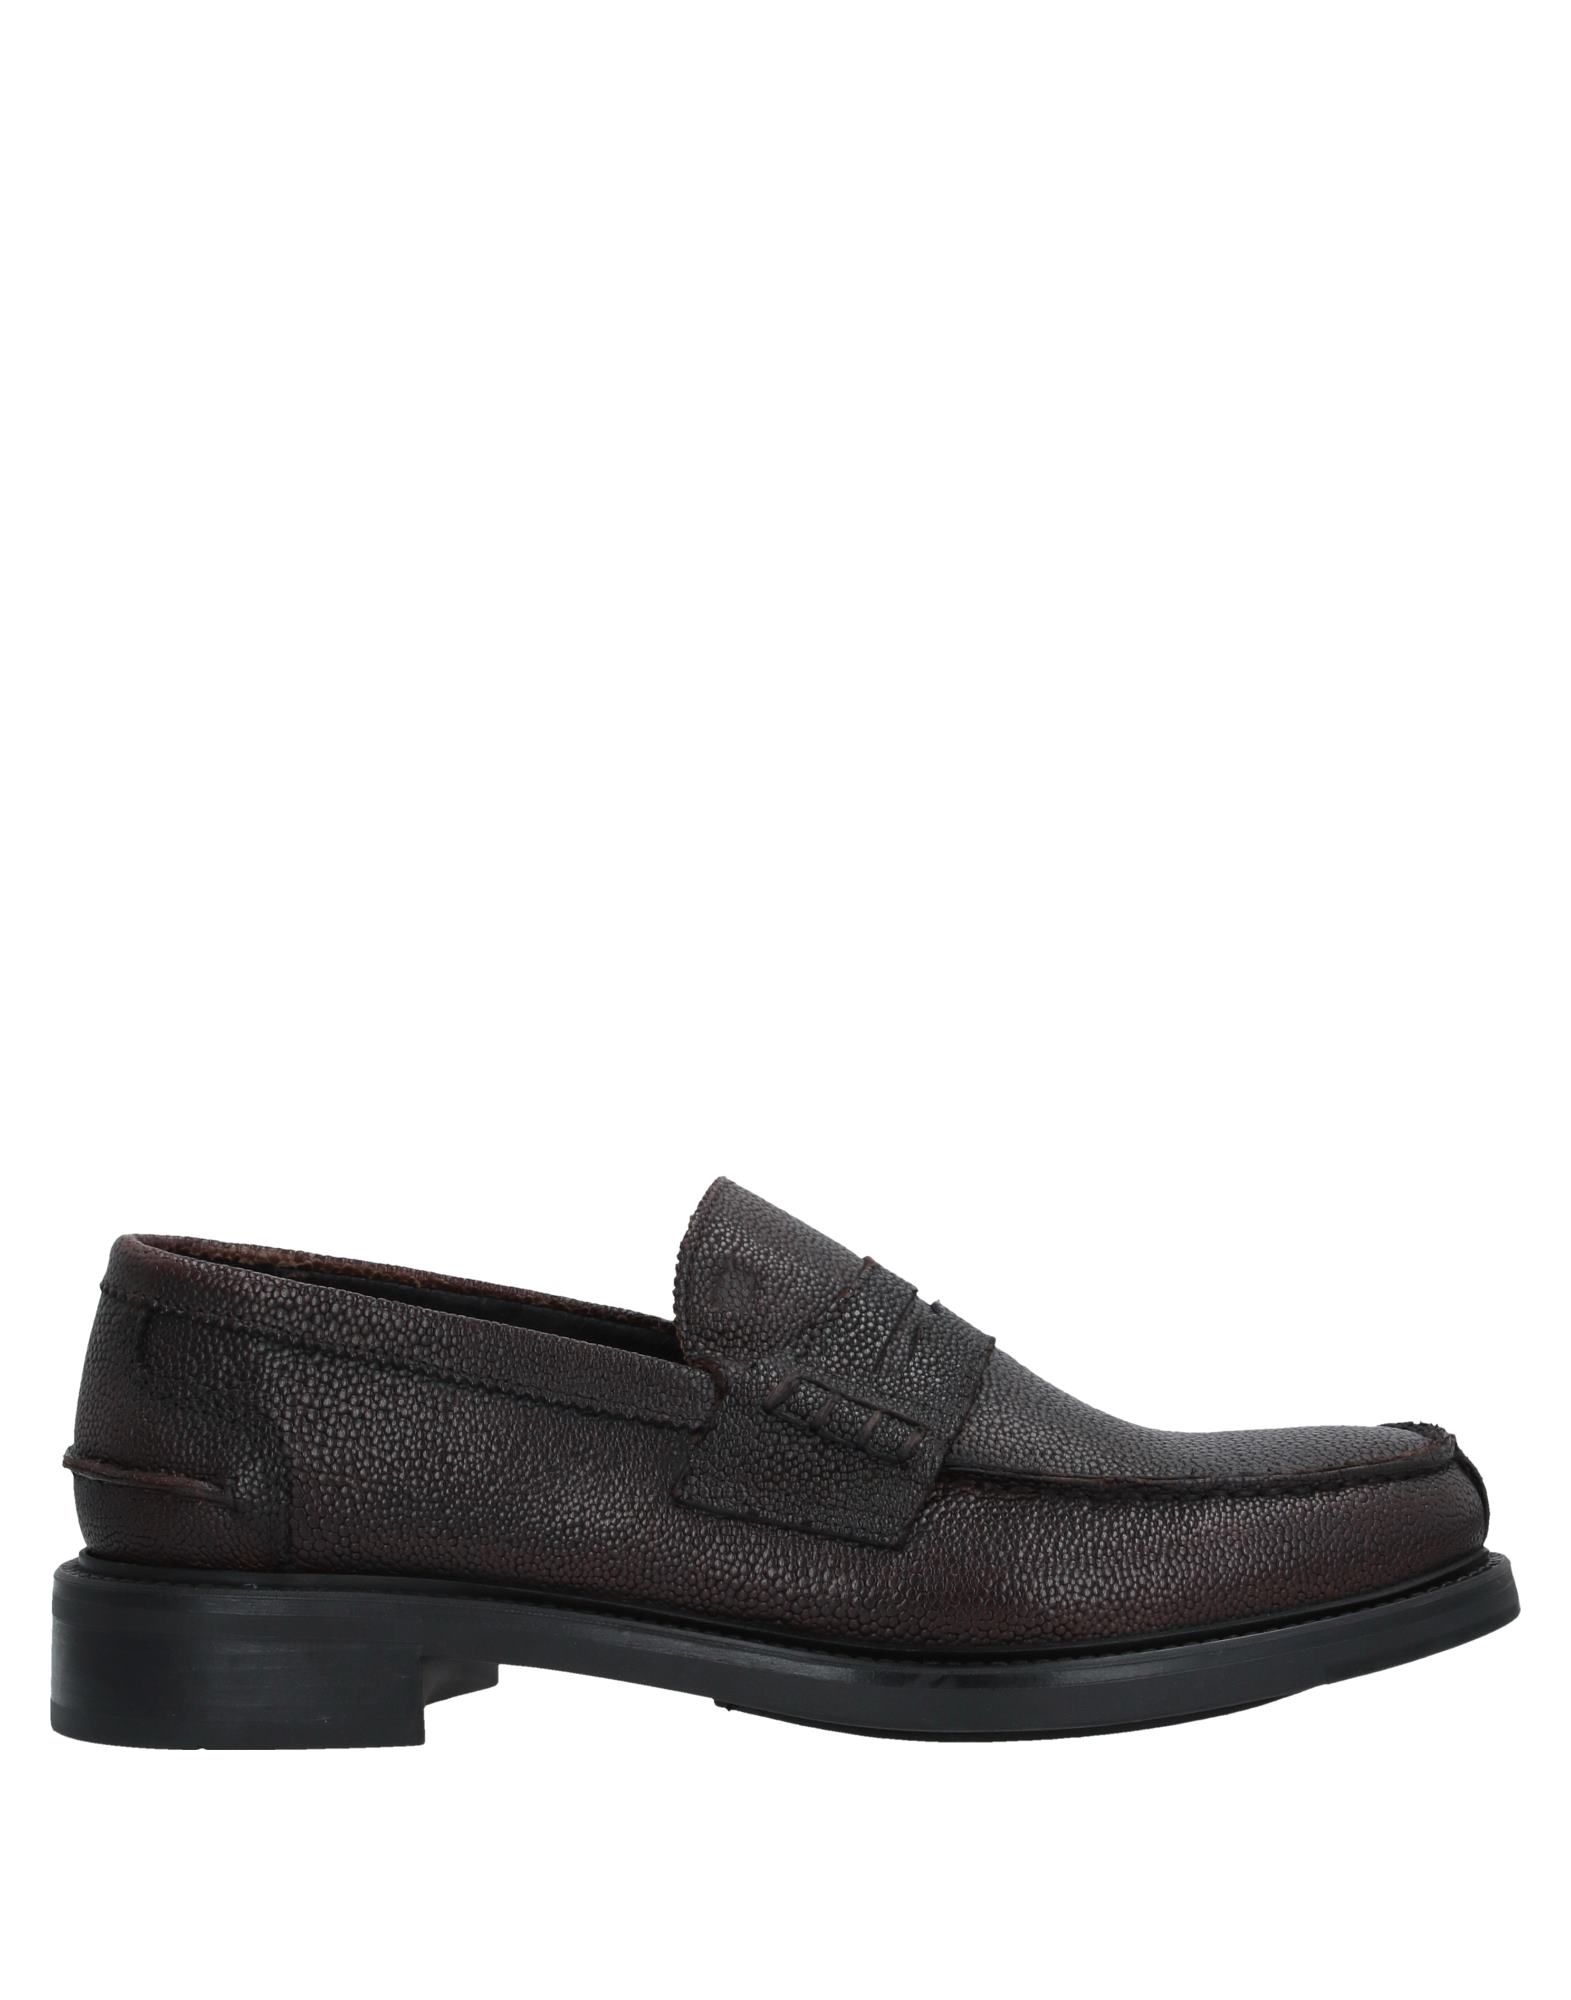 FLORSHEIM IMPERIAL Loafers